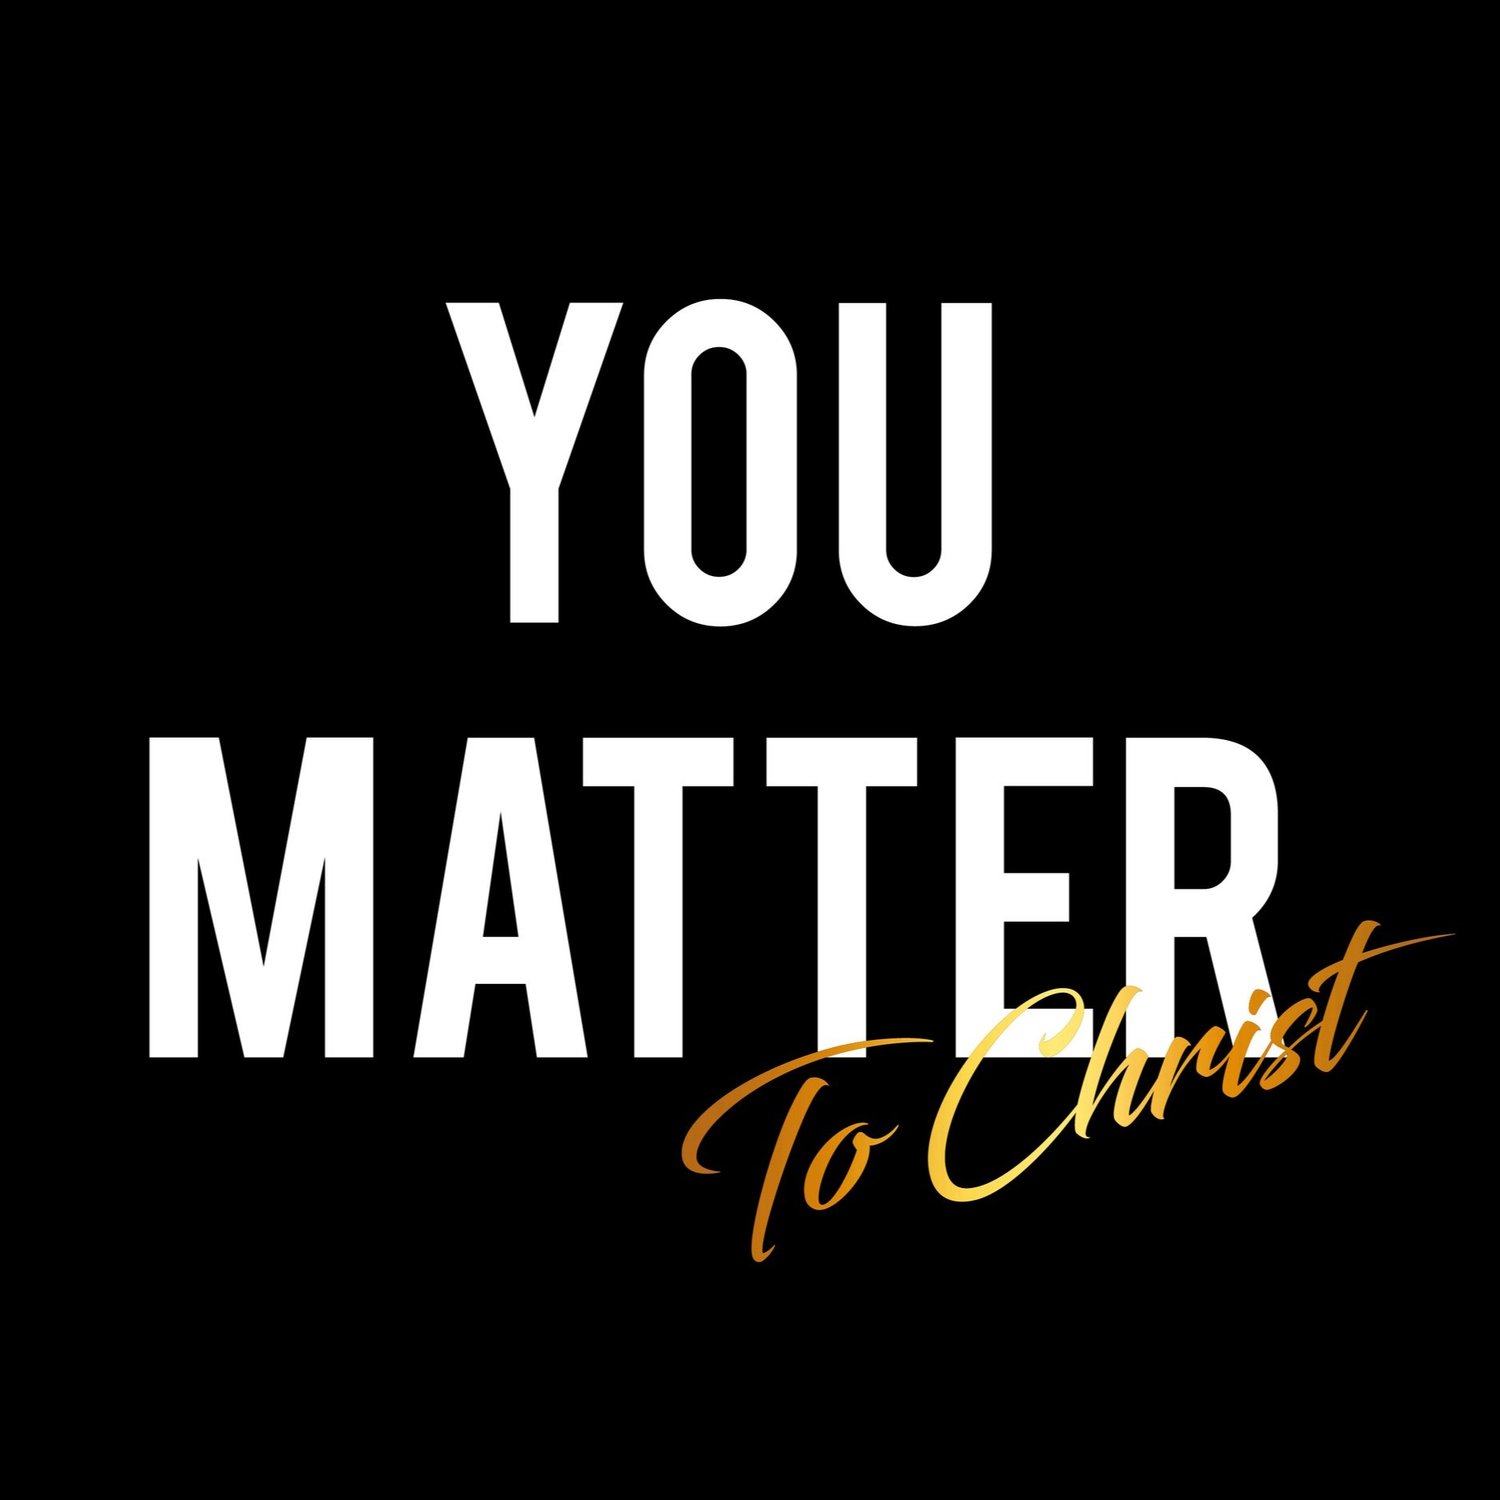 YOU MATTER TO CHRIST